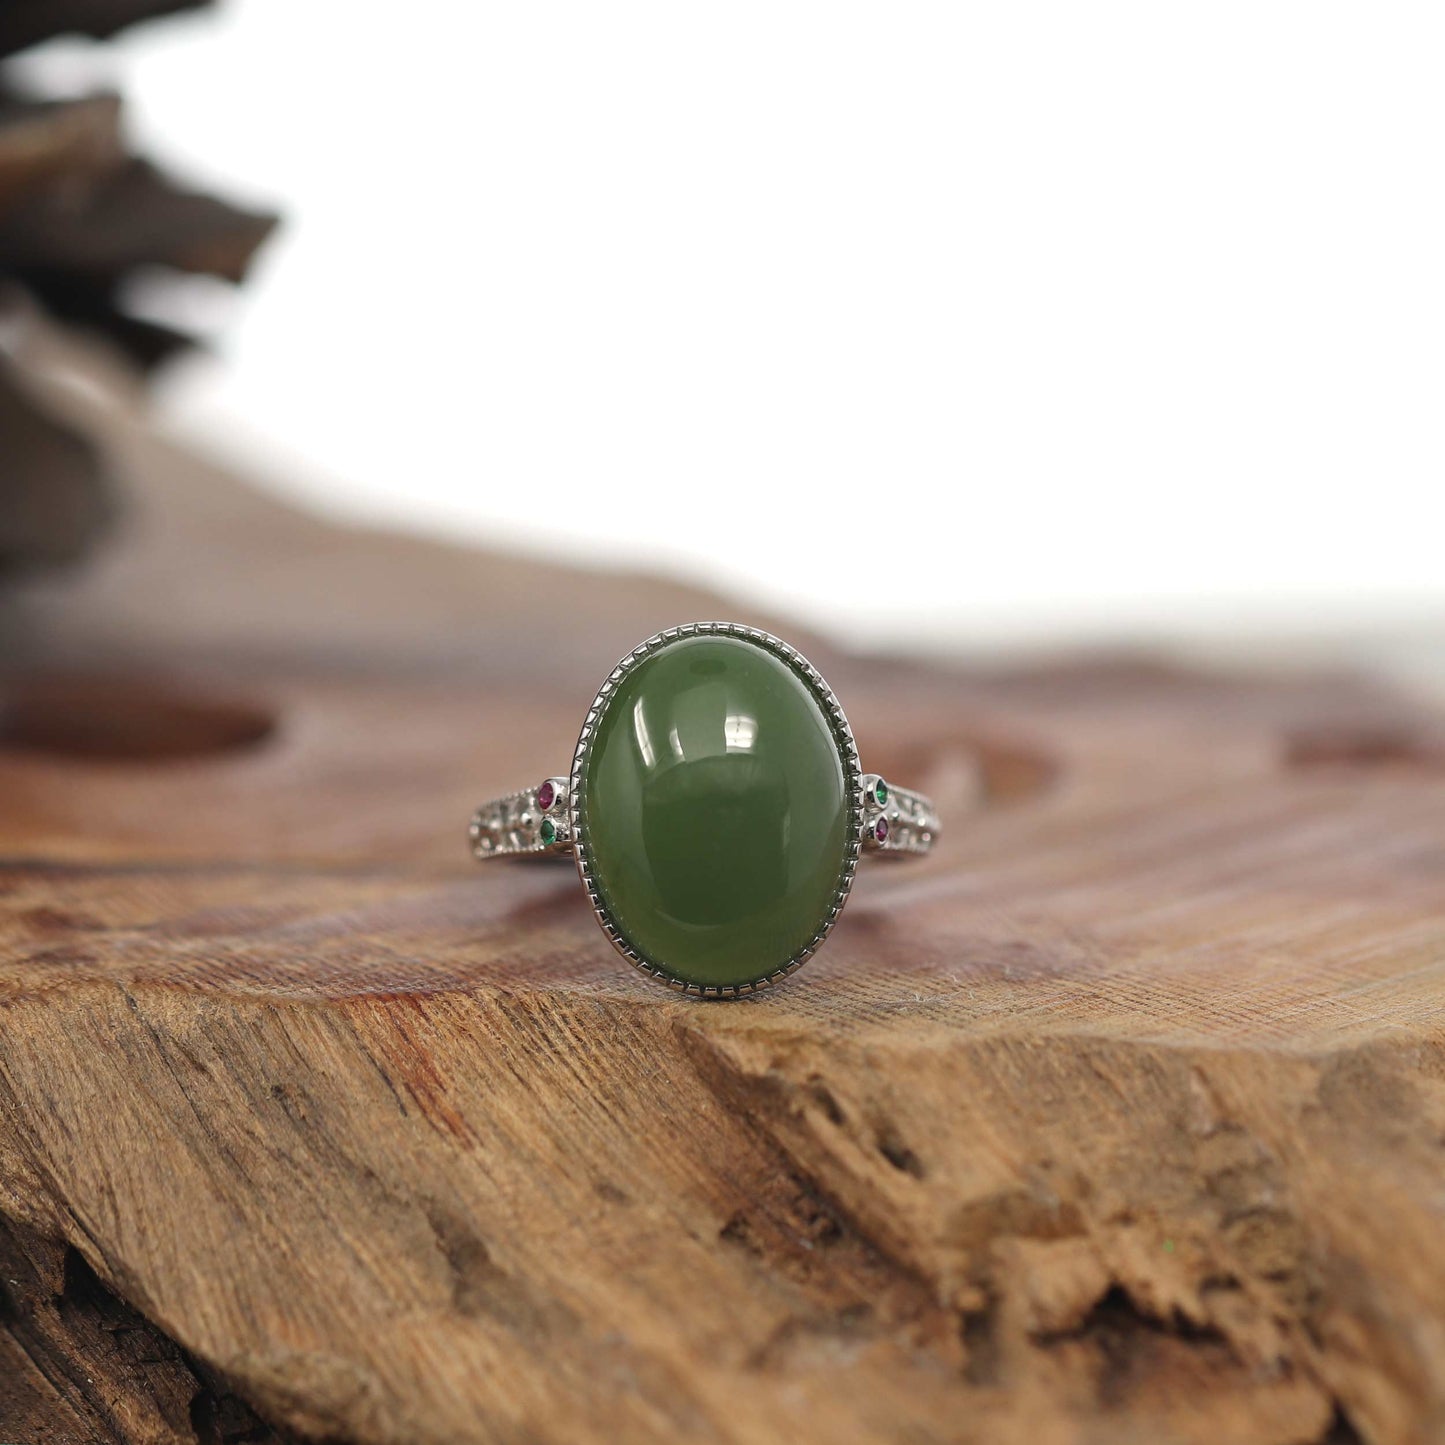 RealJade® Co. RealJade® Co. "Classic Oval With Accents" Sterling Silver Natural Green Nephrite Jade Adjustable Ring For Her